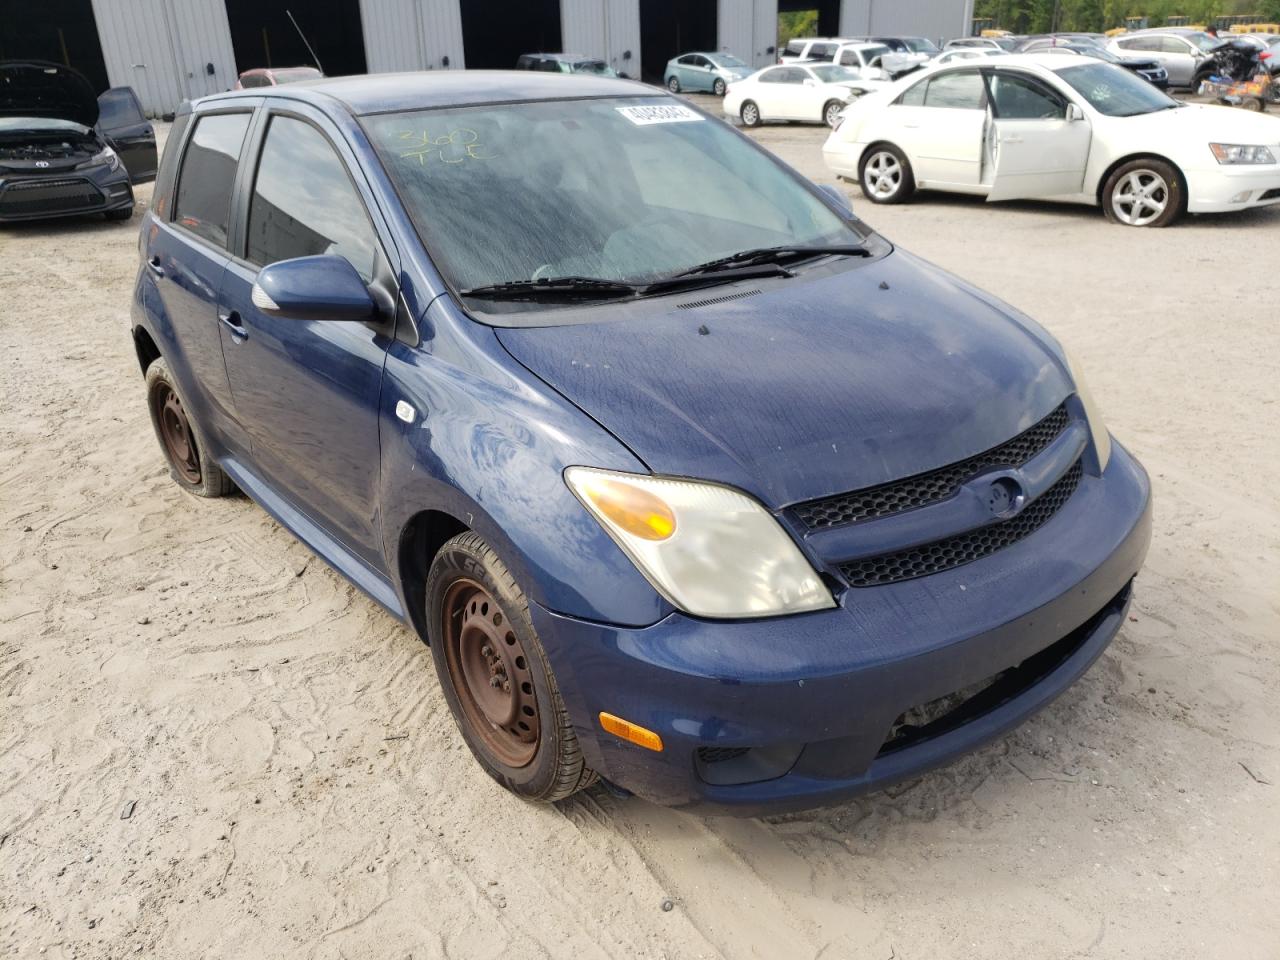 2006 Scion XA for sale at Copart Jacksonville, FL Lot #40483*** |  SalvageReseller.com